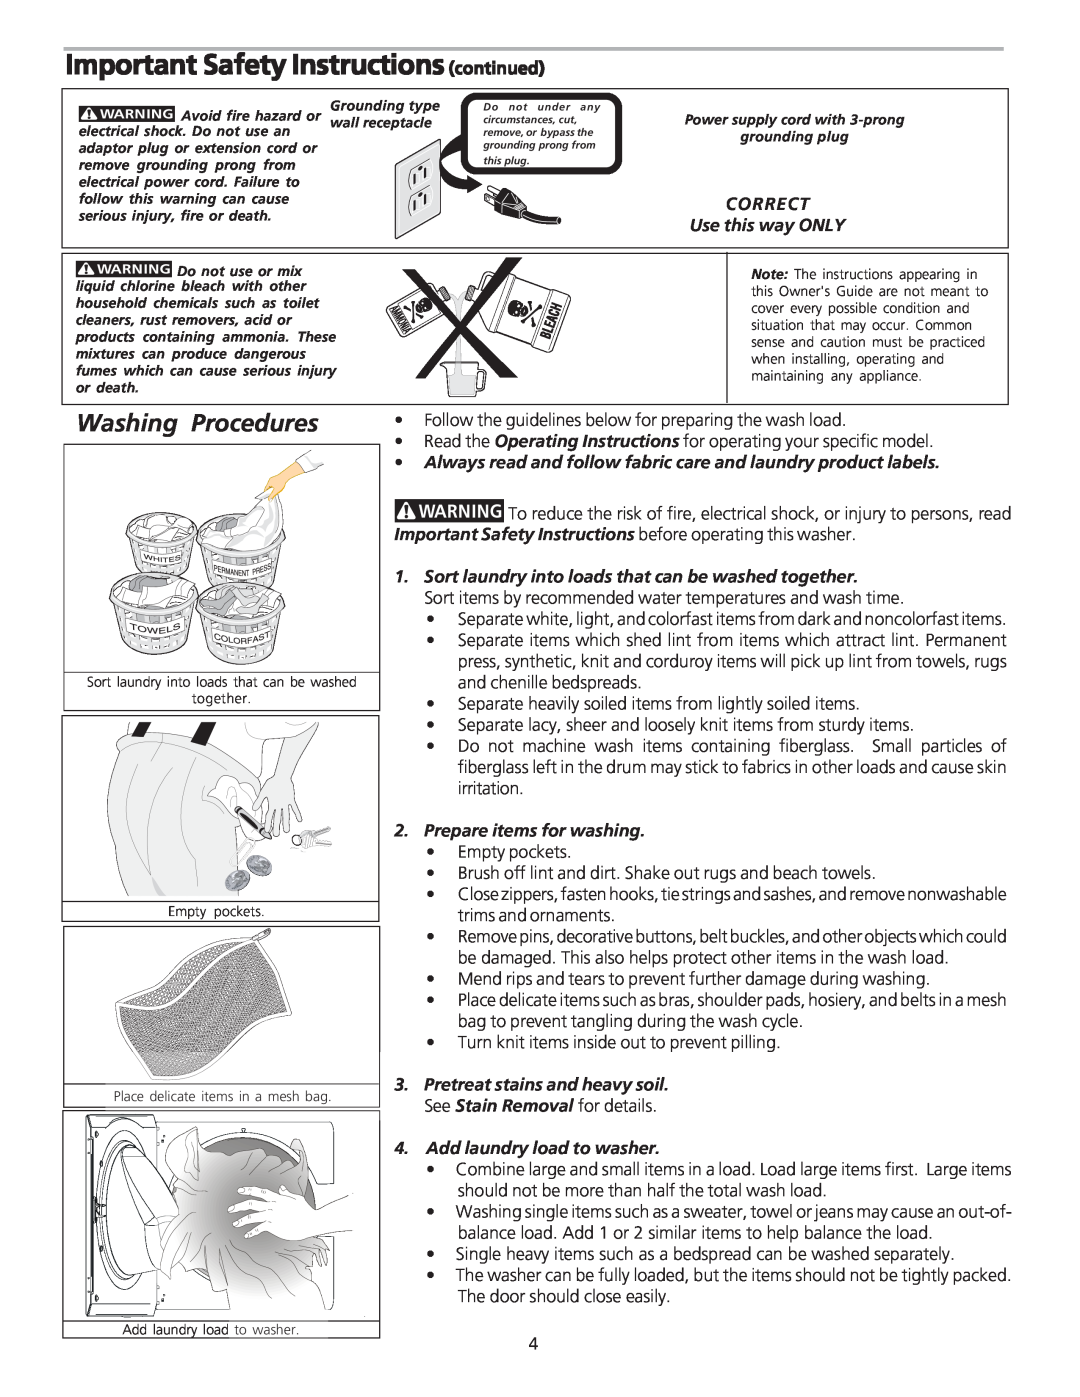 Frigidaire 134922600 manual Important Safety Instructions continued, Washing Procedures, CORRECT Use this way ONLY 